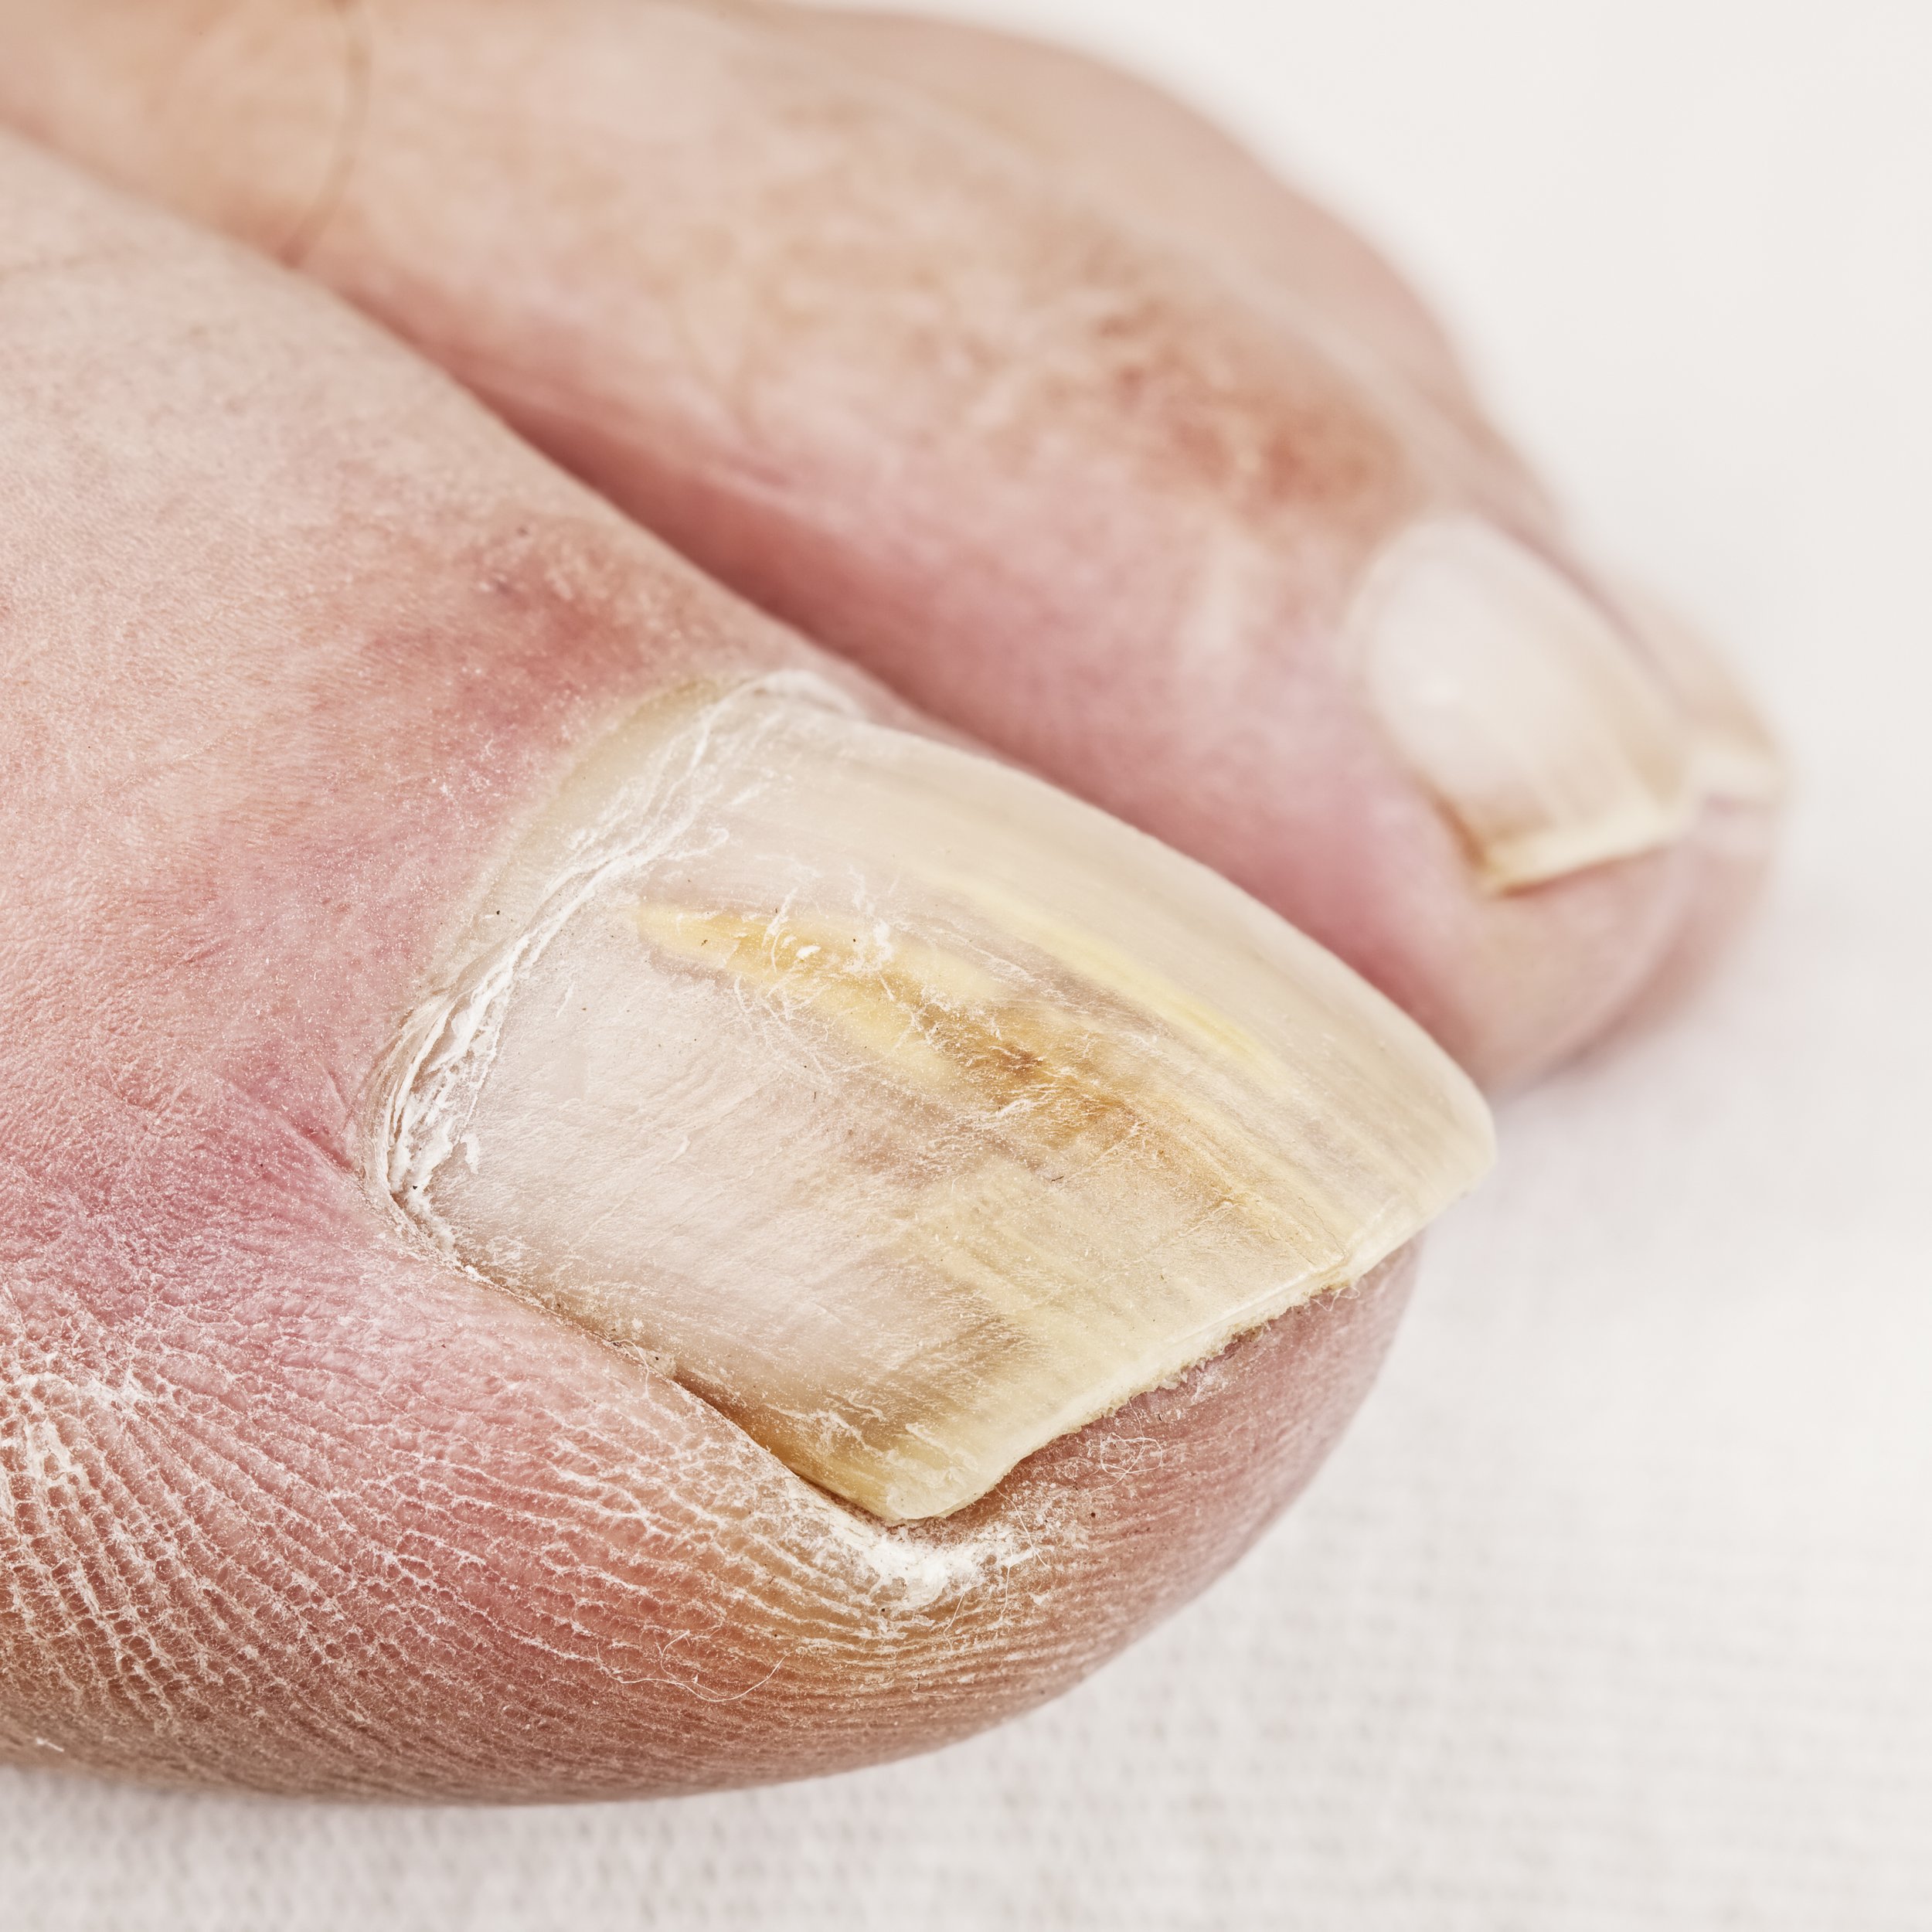 How to Get Rid of Toenail Fungus - JAWS podiatry